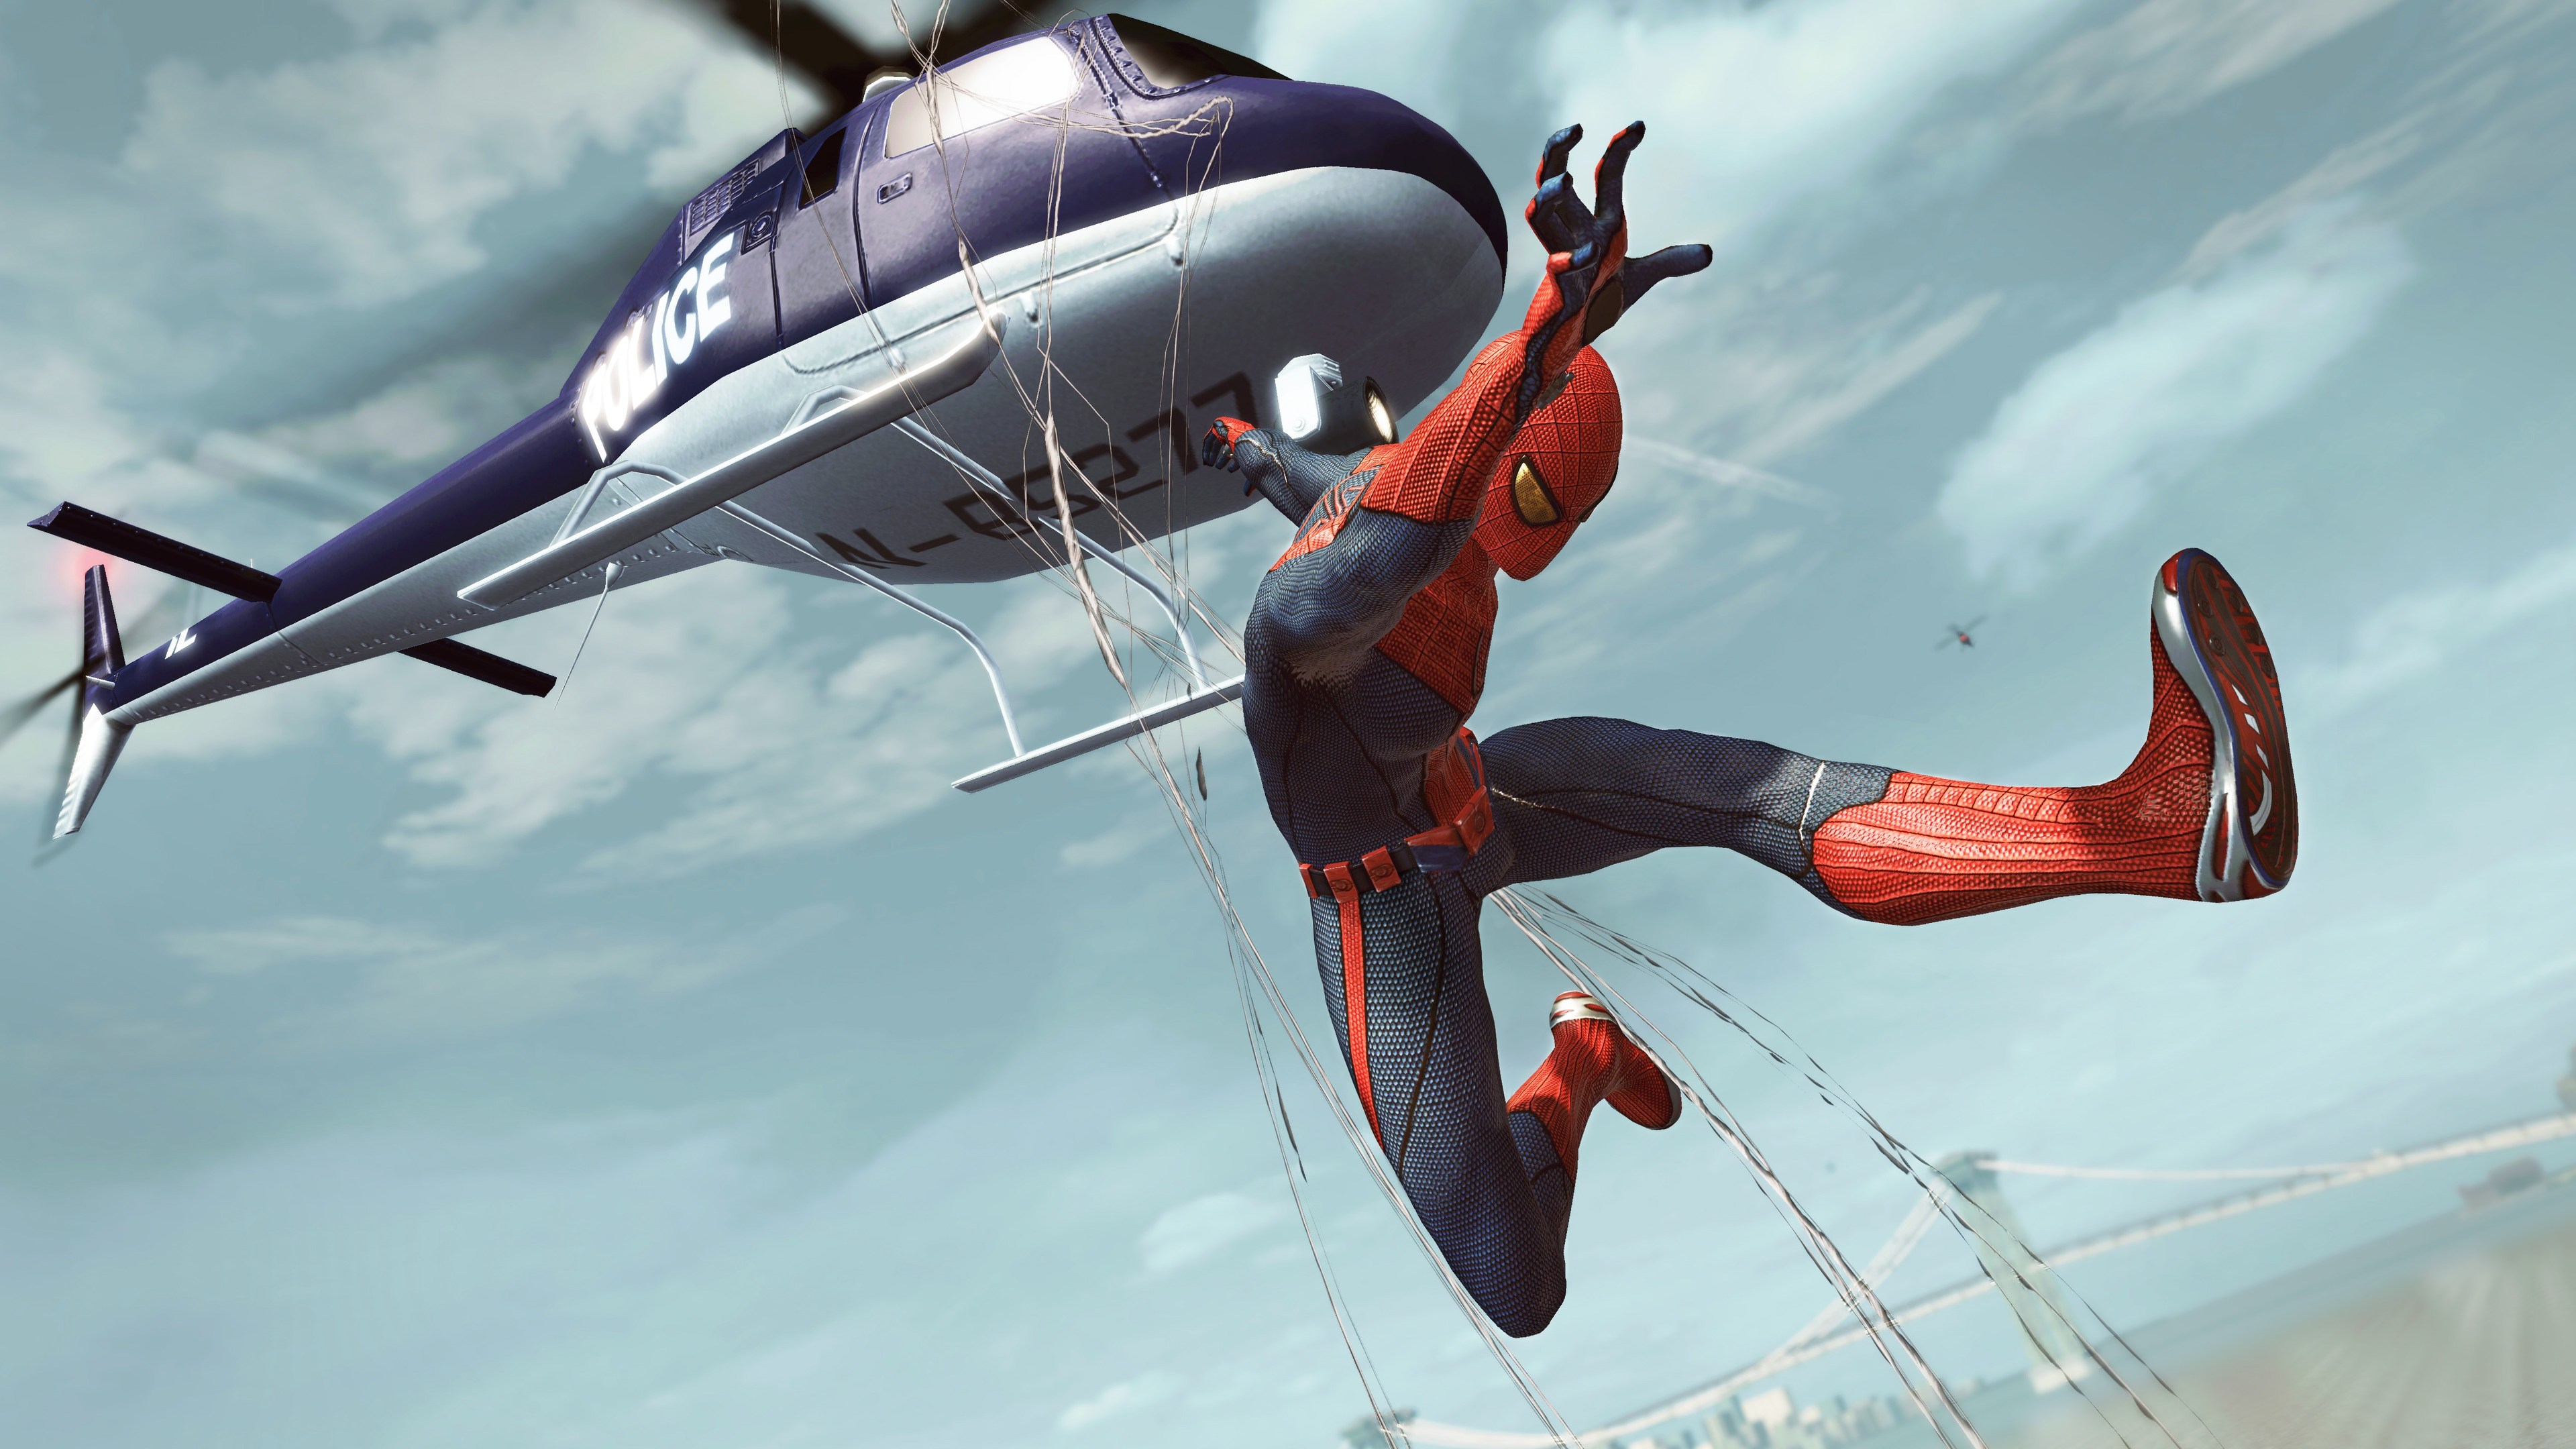 Wallpaper 4k Spiderman Jumping Out Of Helicopter Wallpaper